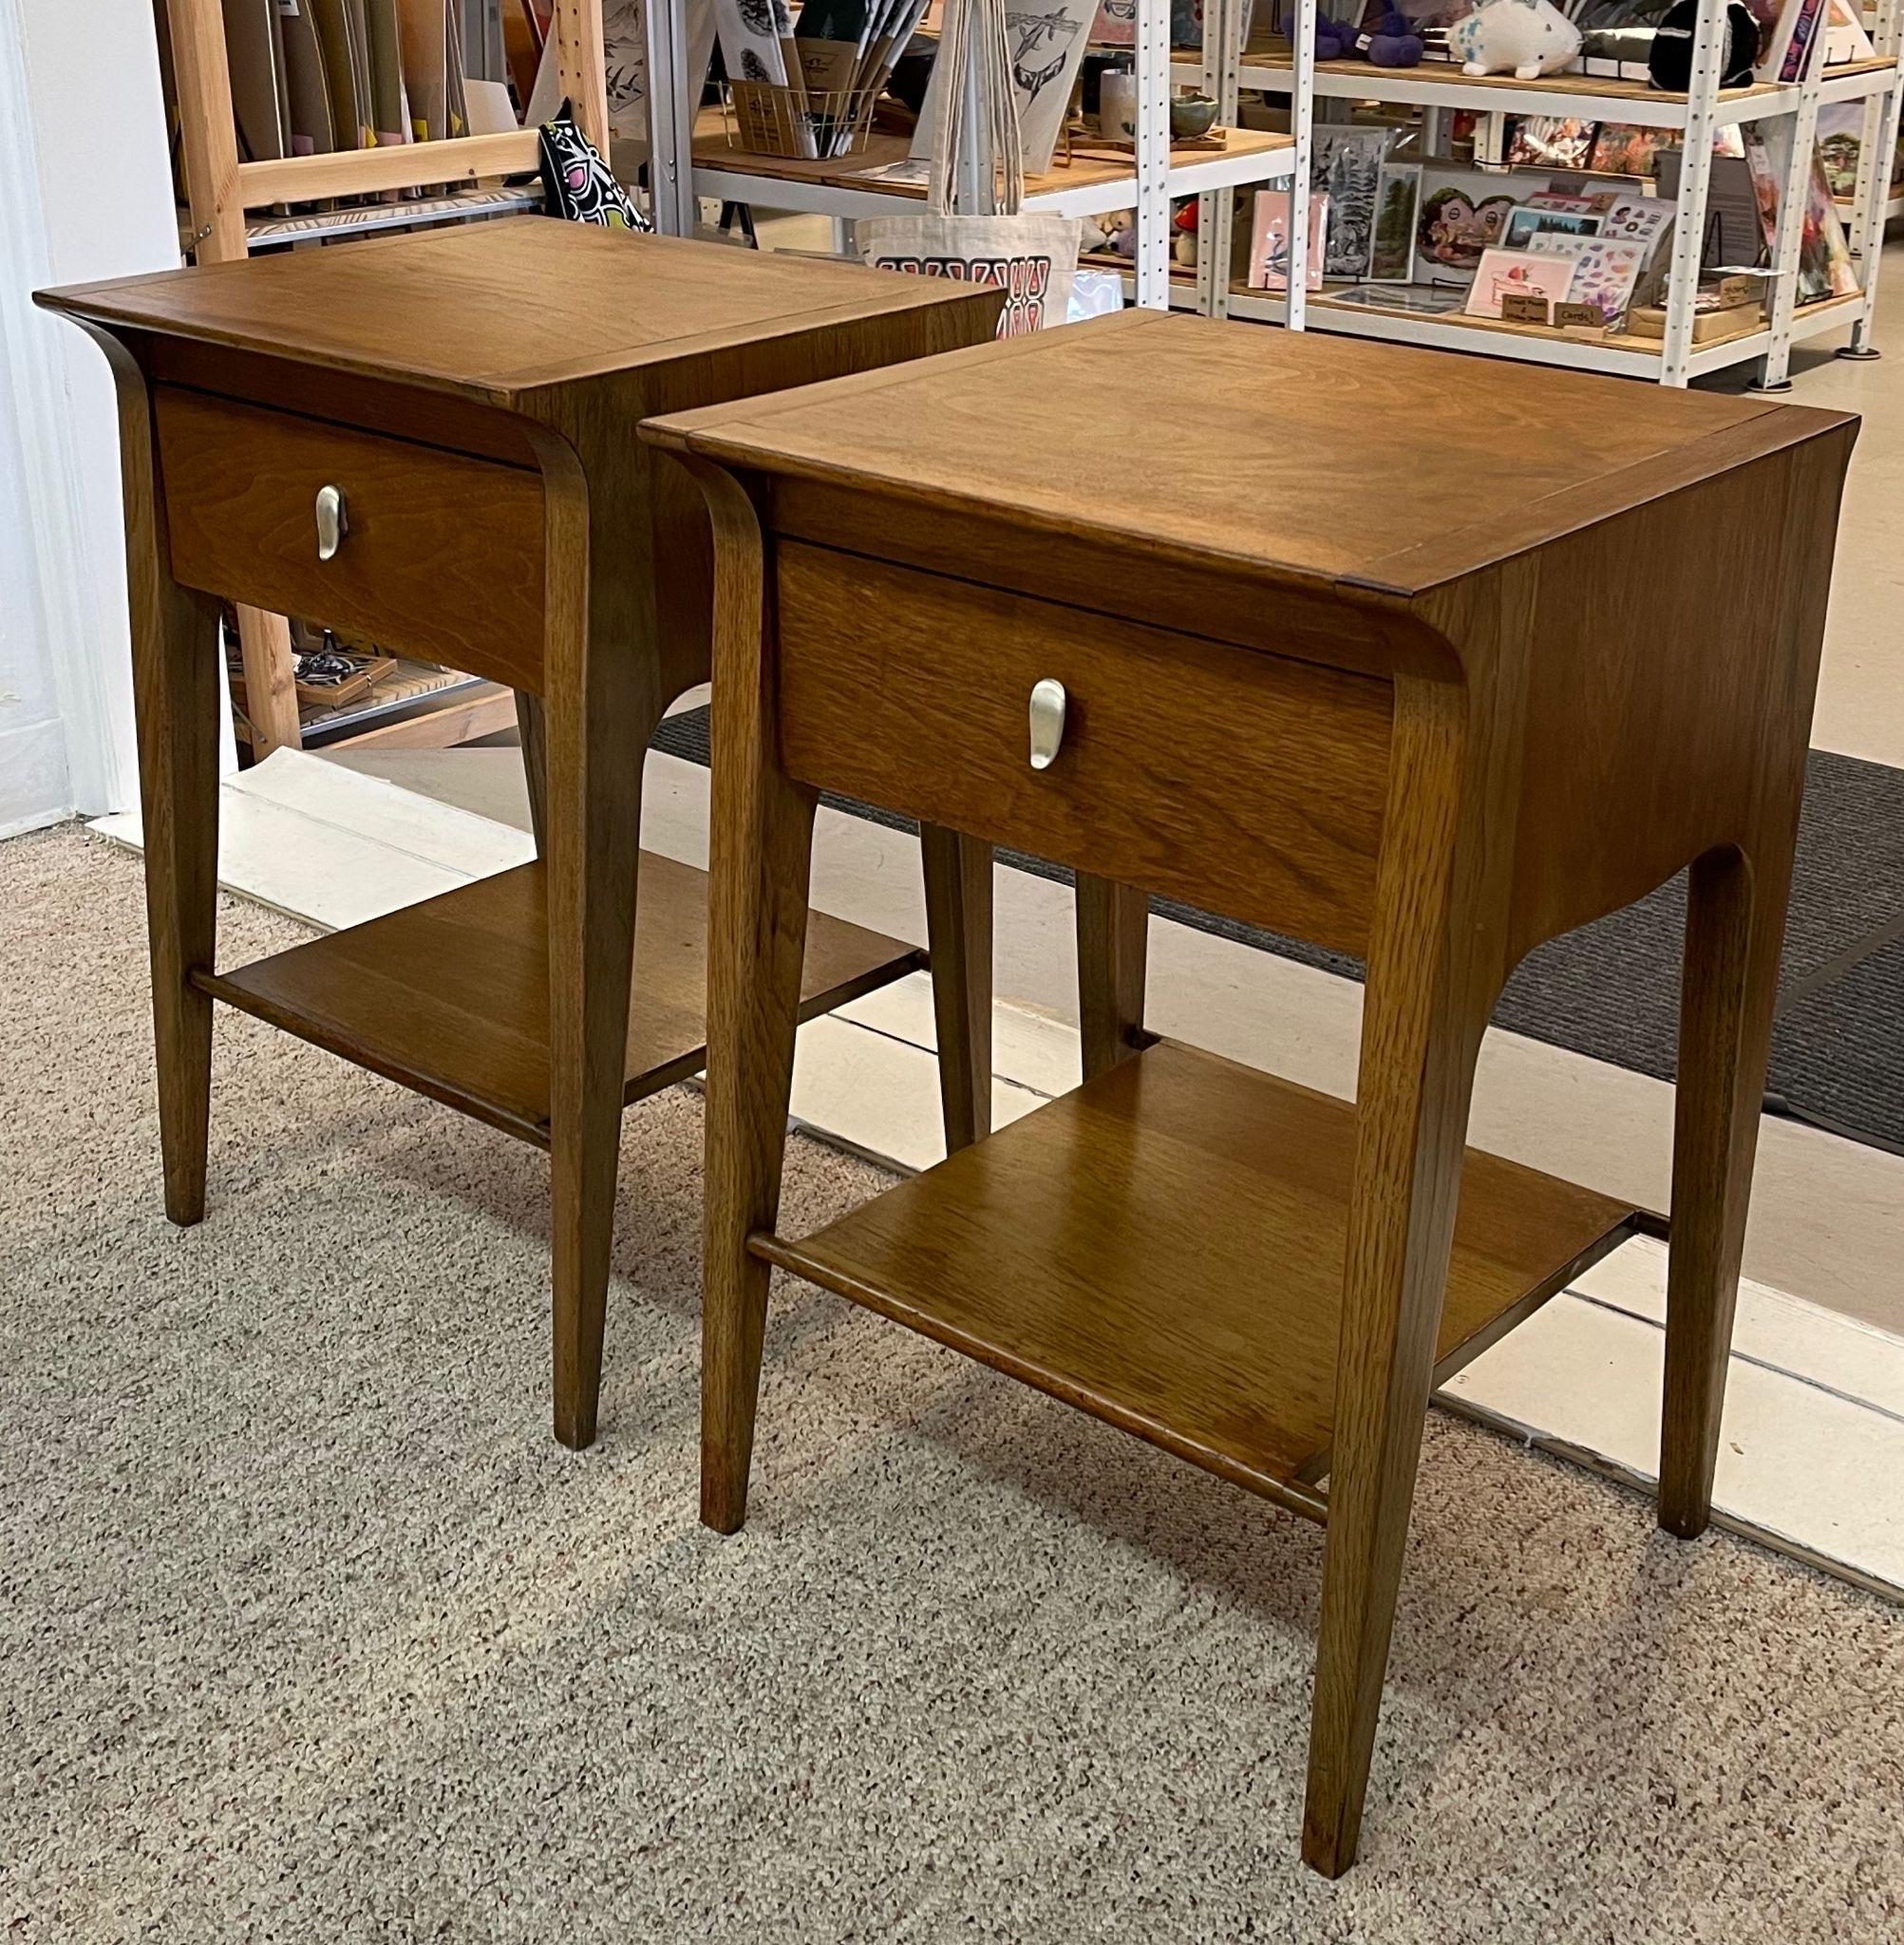 Pair of Vintage Mid Century Modern End Tables by Drexel Profile With John Van In Good Condition For Sale In Seattle, WA